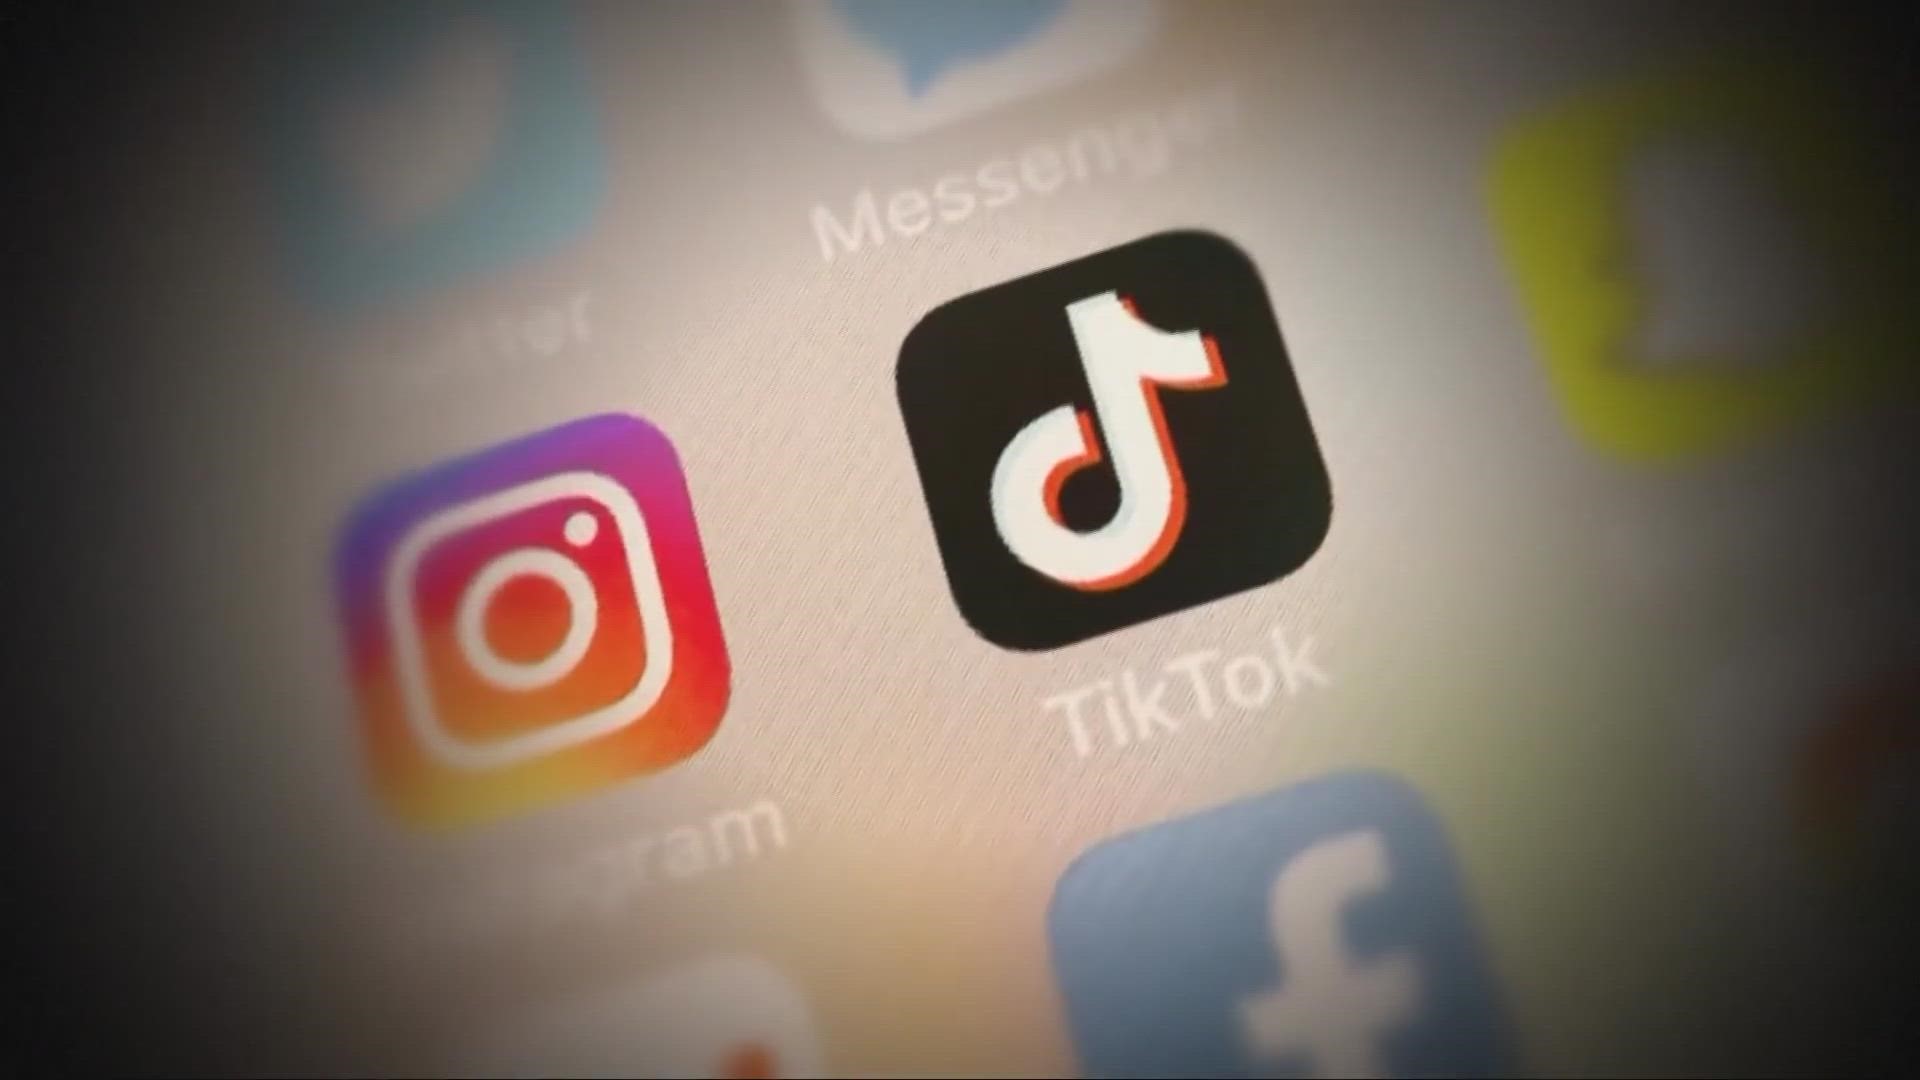 The White House is giving U.S. federal agencies 30 days to delete popular Chinese-owned social media app TikTok from all government-issued mobile devices.